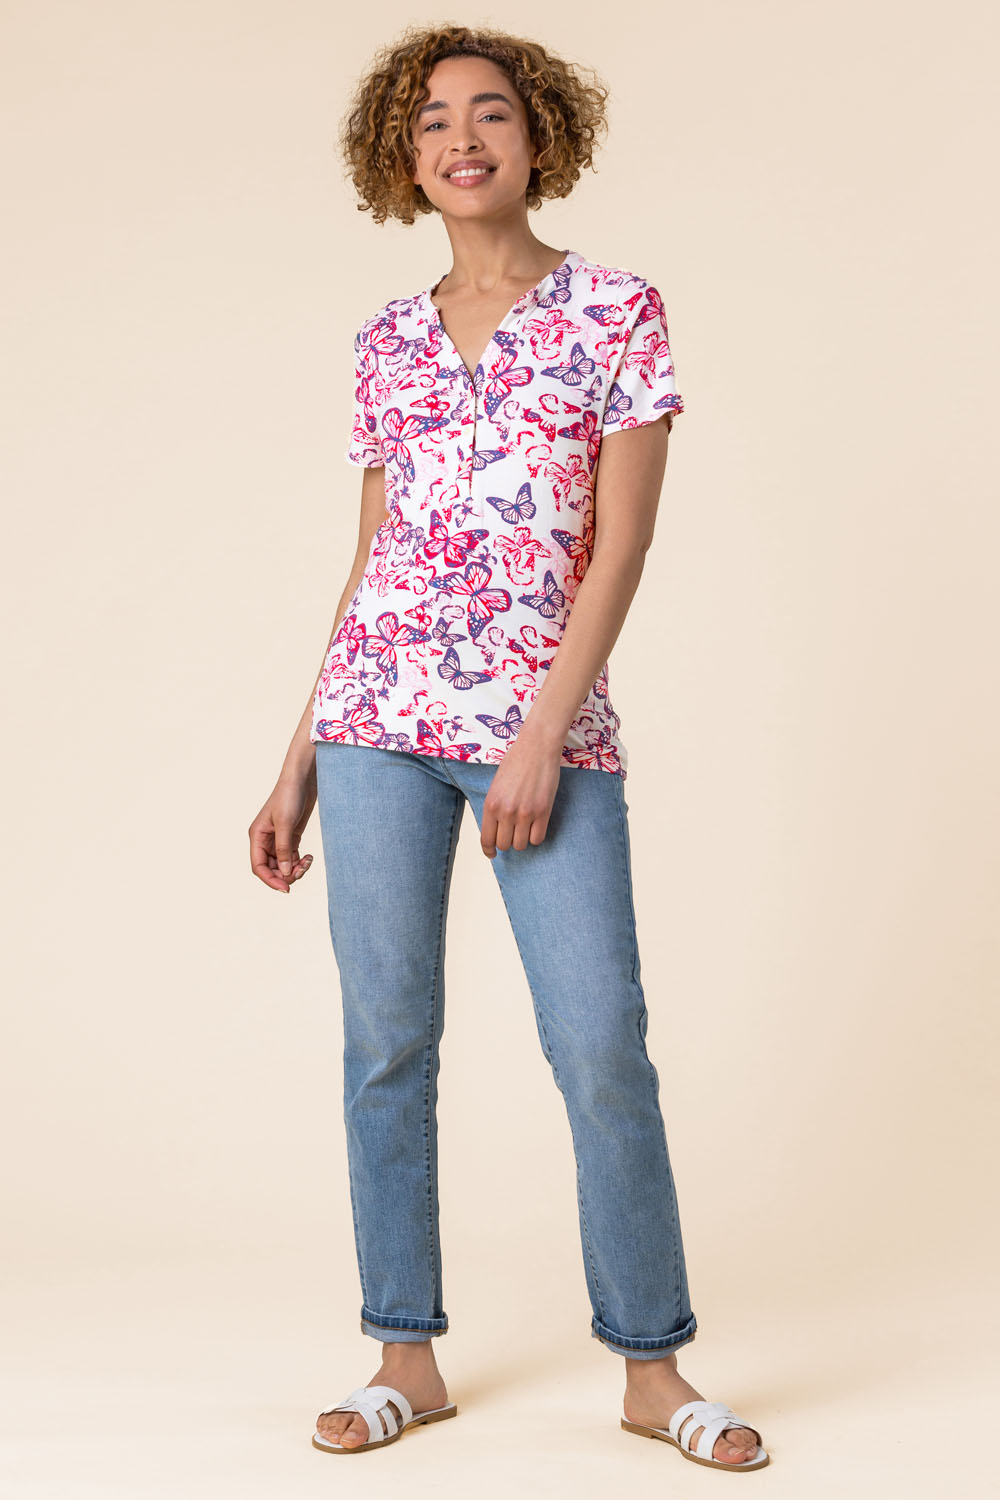 PINK Butterfly Print Button Top, Image 3 of 5